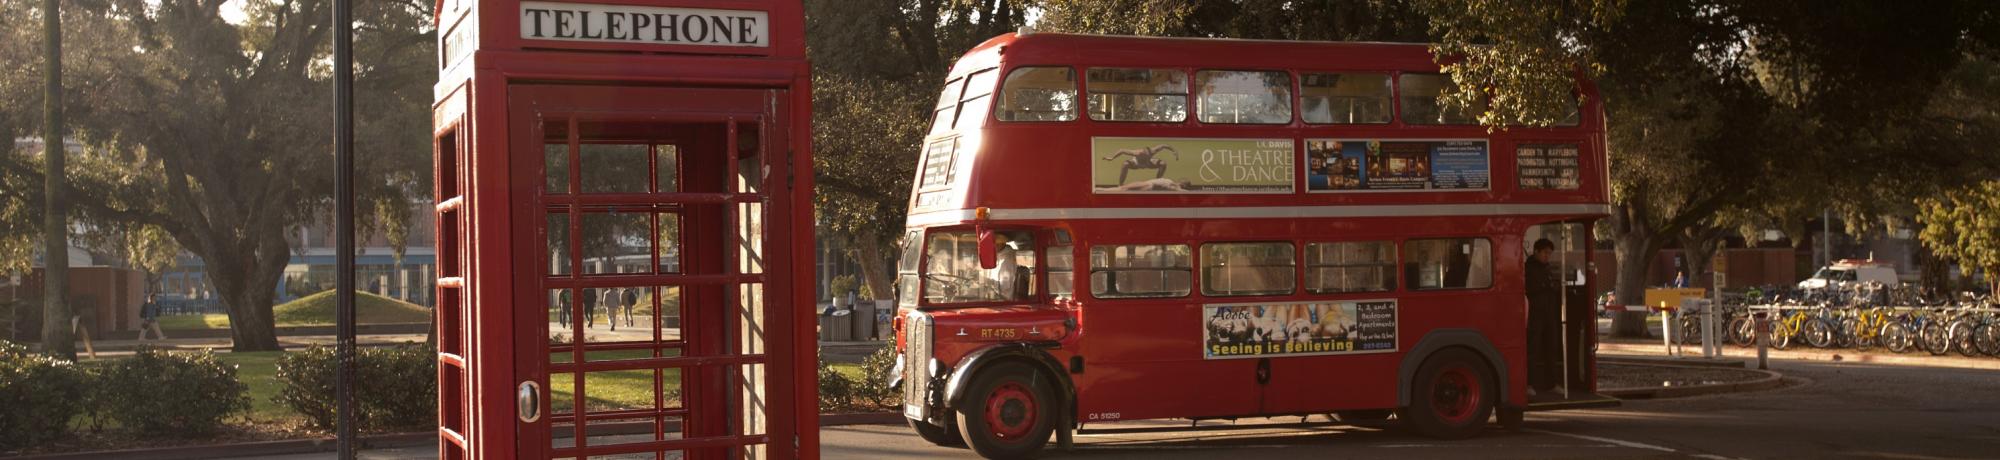 Image: campus grounds with a red vintage phone booth and double-decker bus.